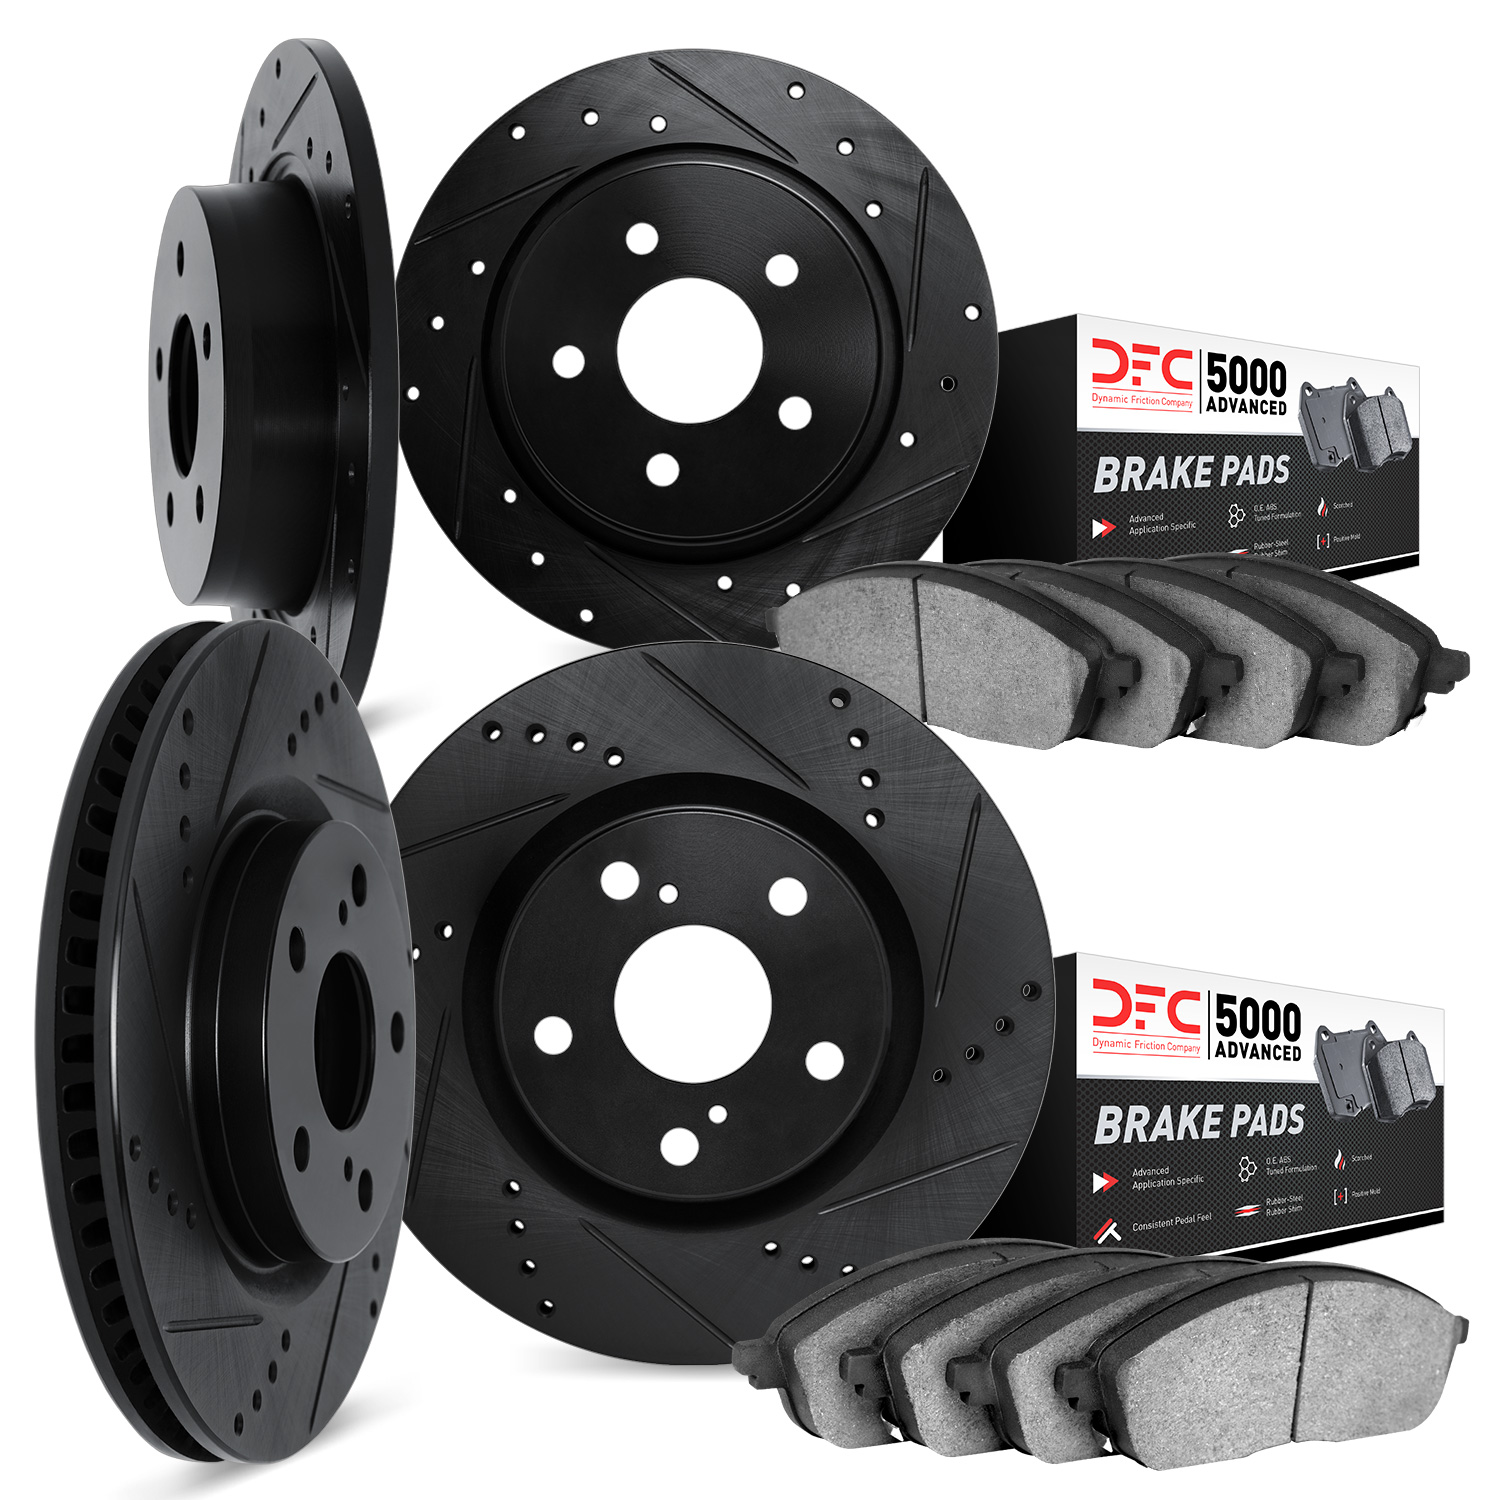 8504-27007 Drilled/Slotted Brake Rotors w/5000 Advanced Brake Pads Kit [Black], 2004-2013 Volvo, Position: Front and Rear